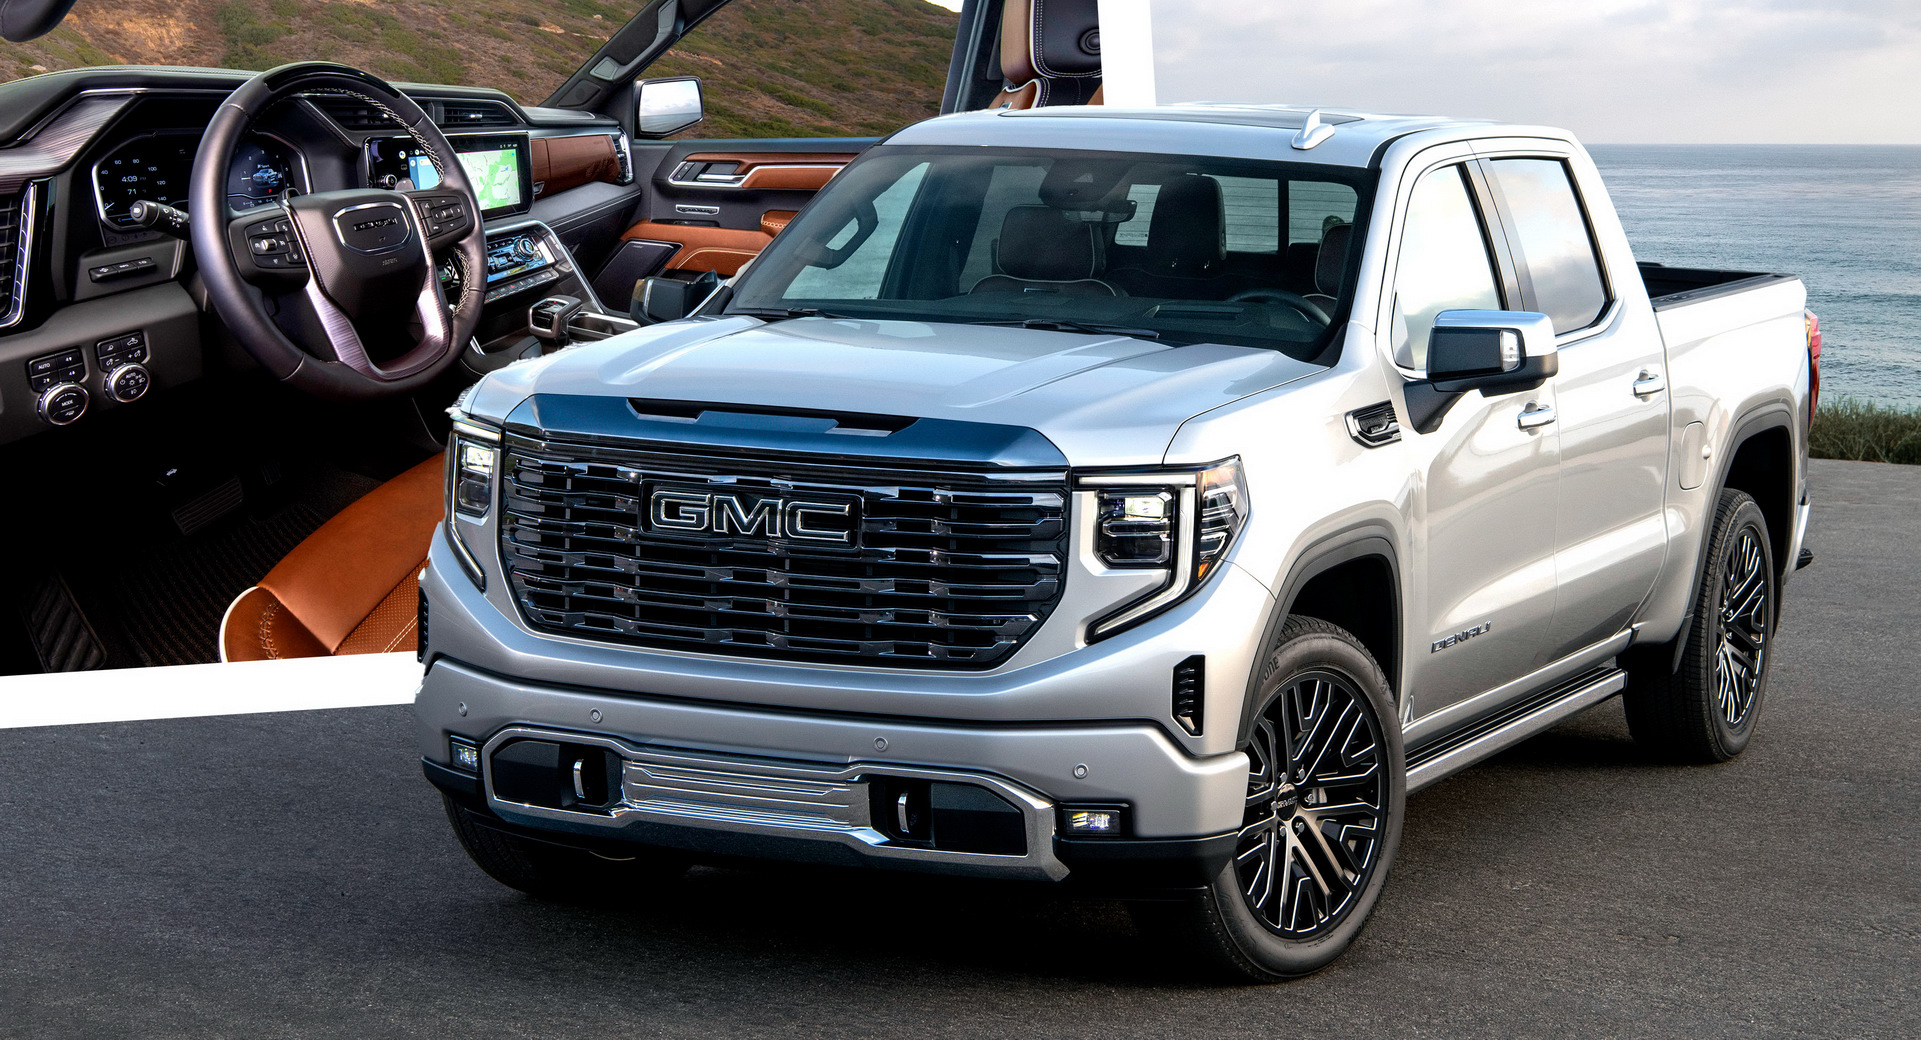 First Drive: 2022 GMC Sierra Denali Ultimate Is The New King Of